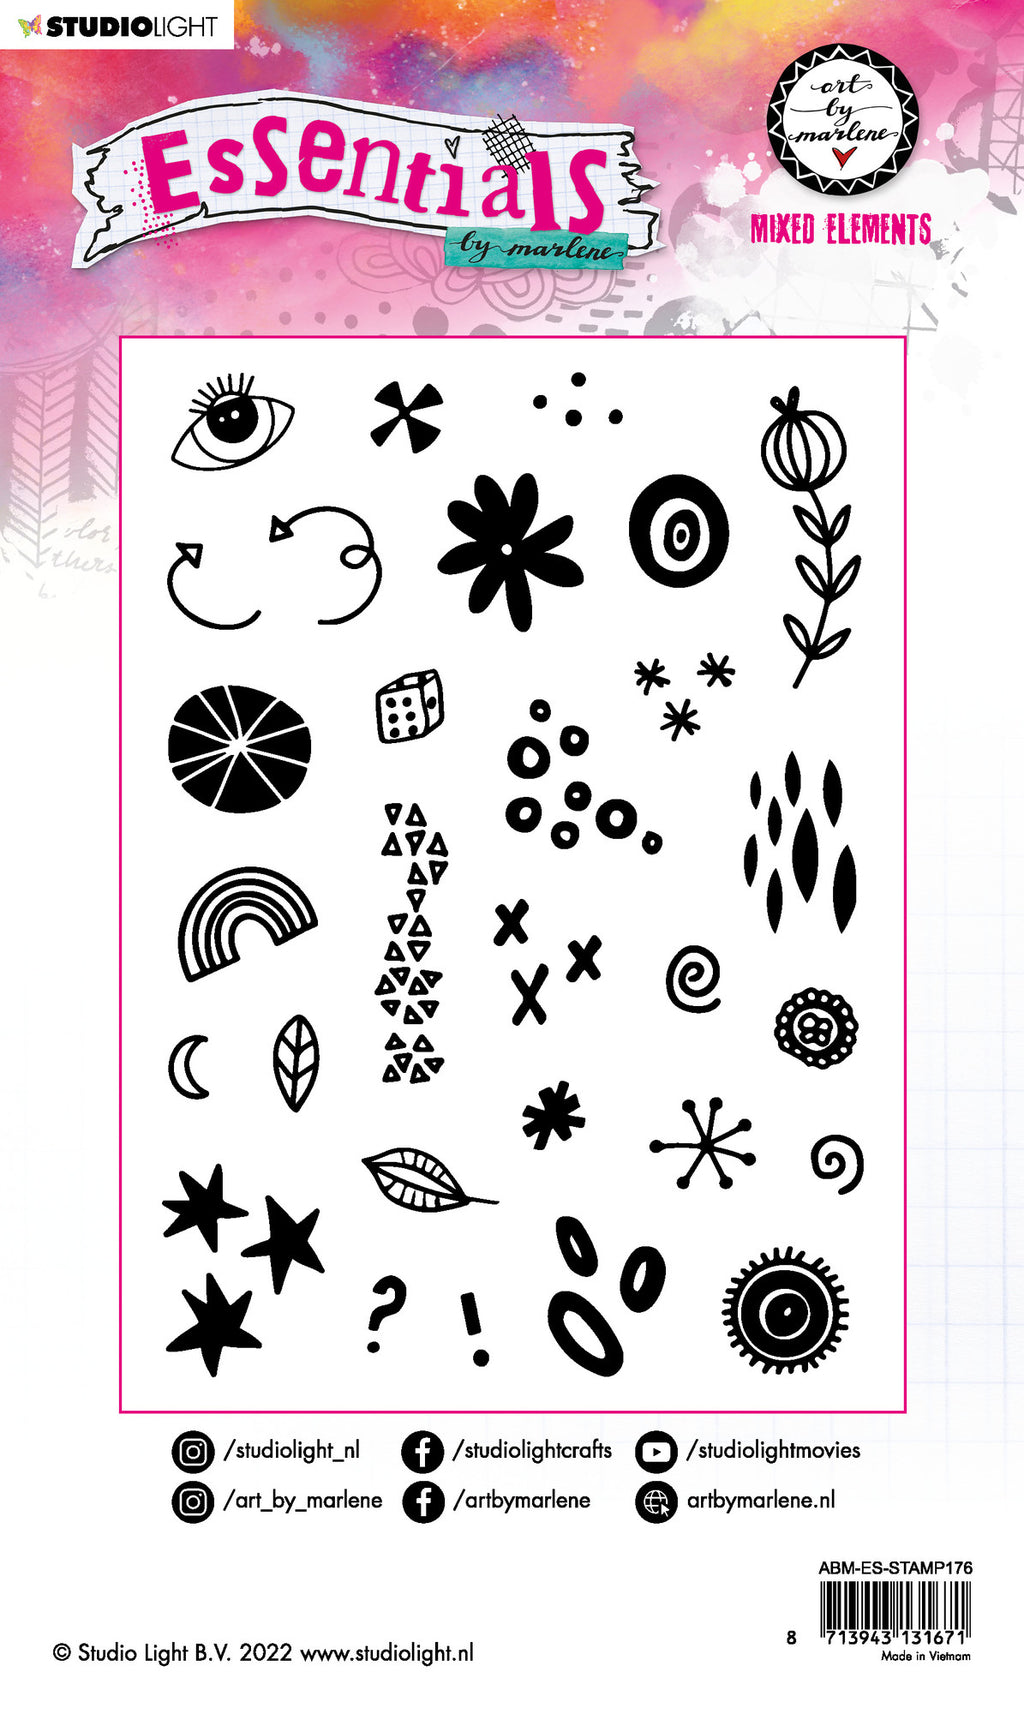 Studio Light -  Art by Marlene - Essentials - Rubber Cling Stamps - Mixed Elements - Sunset Landscape